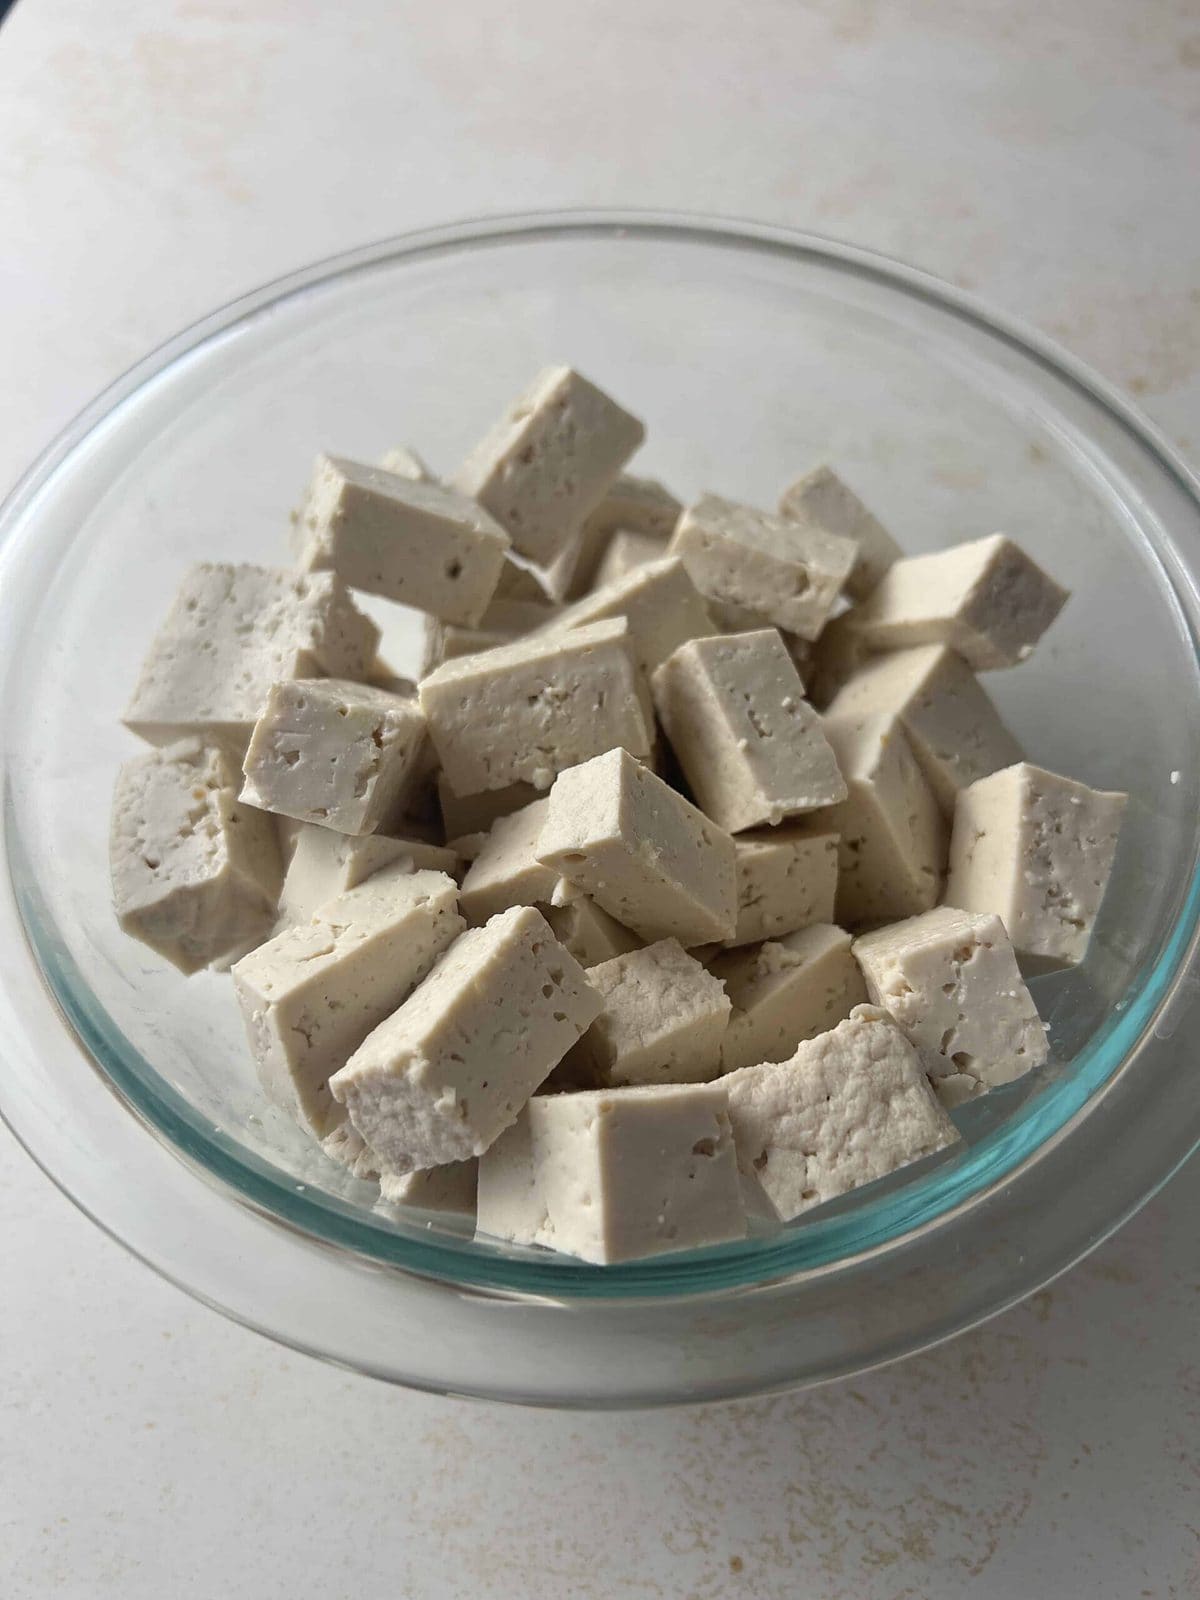 This is a photo of cut up tofu in a bowl.
